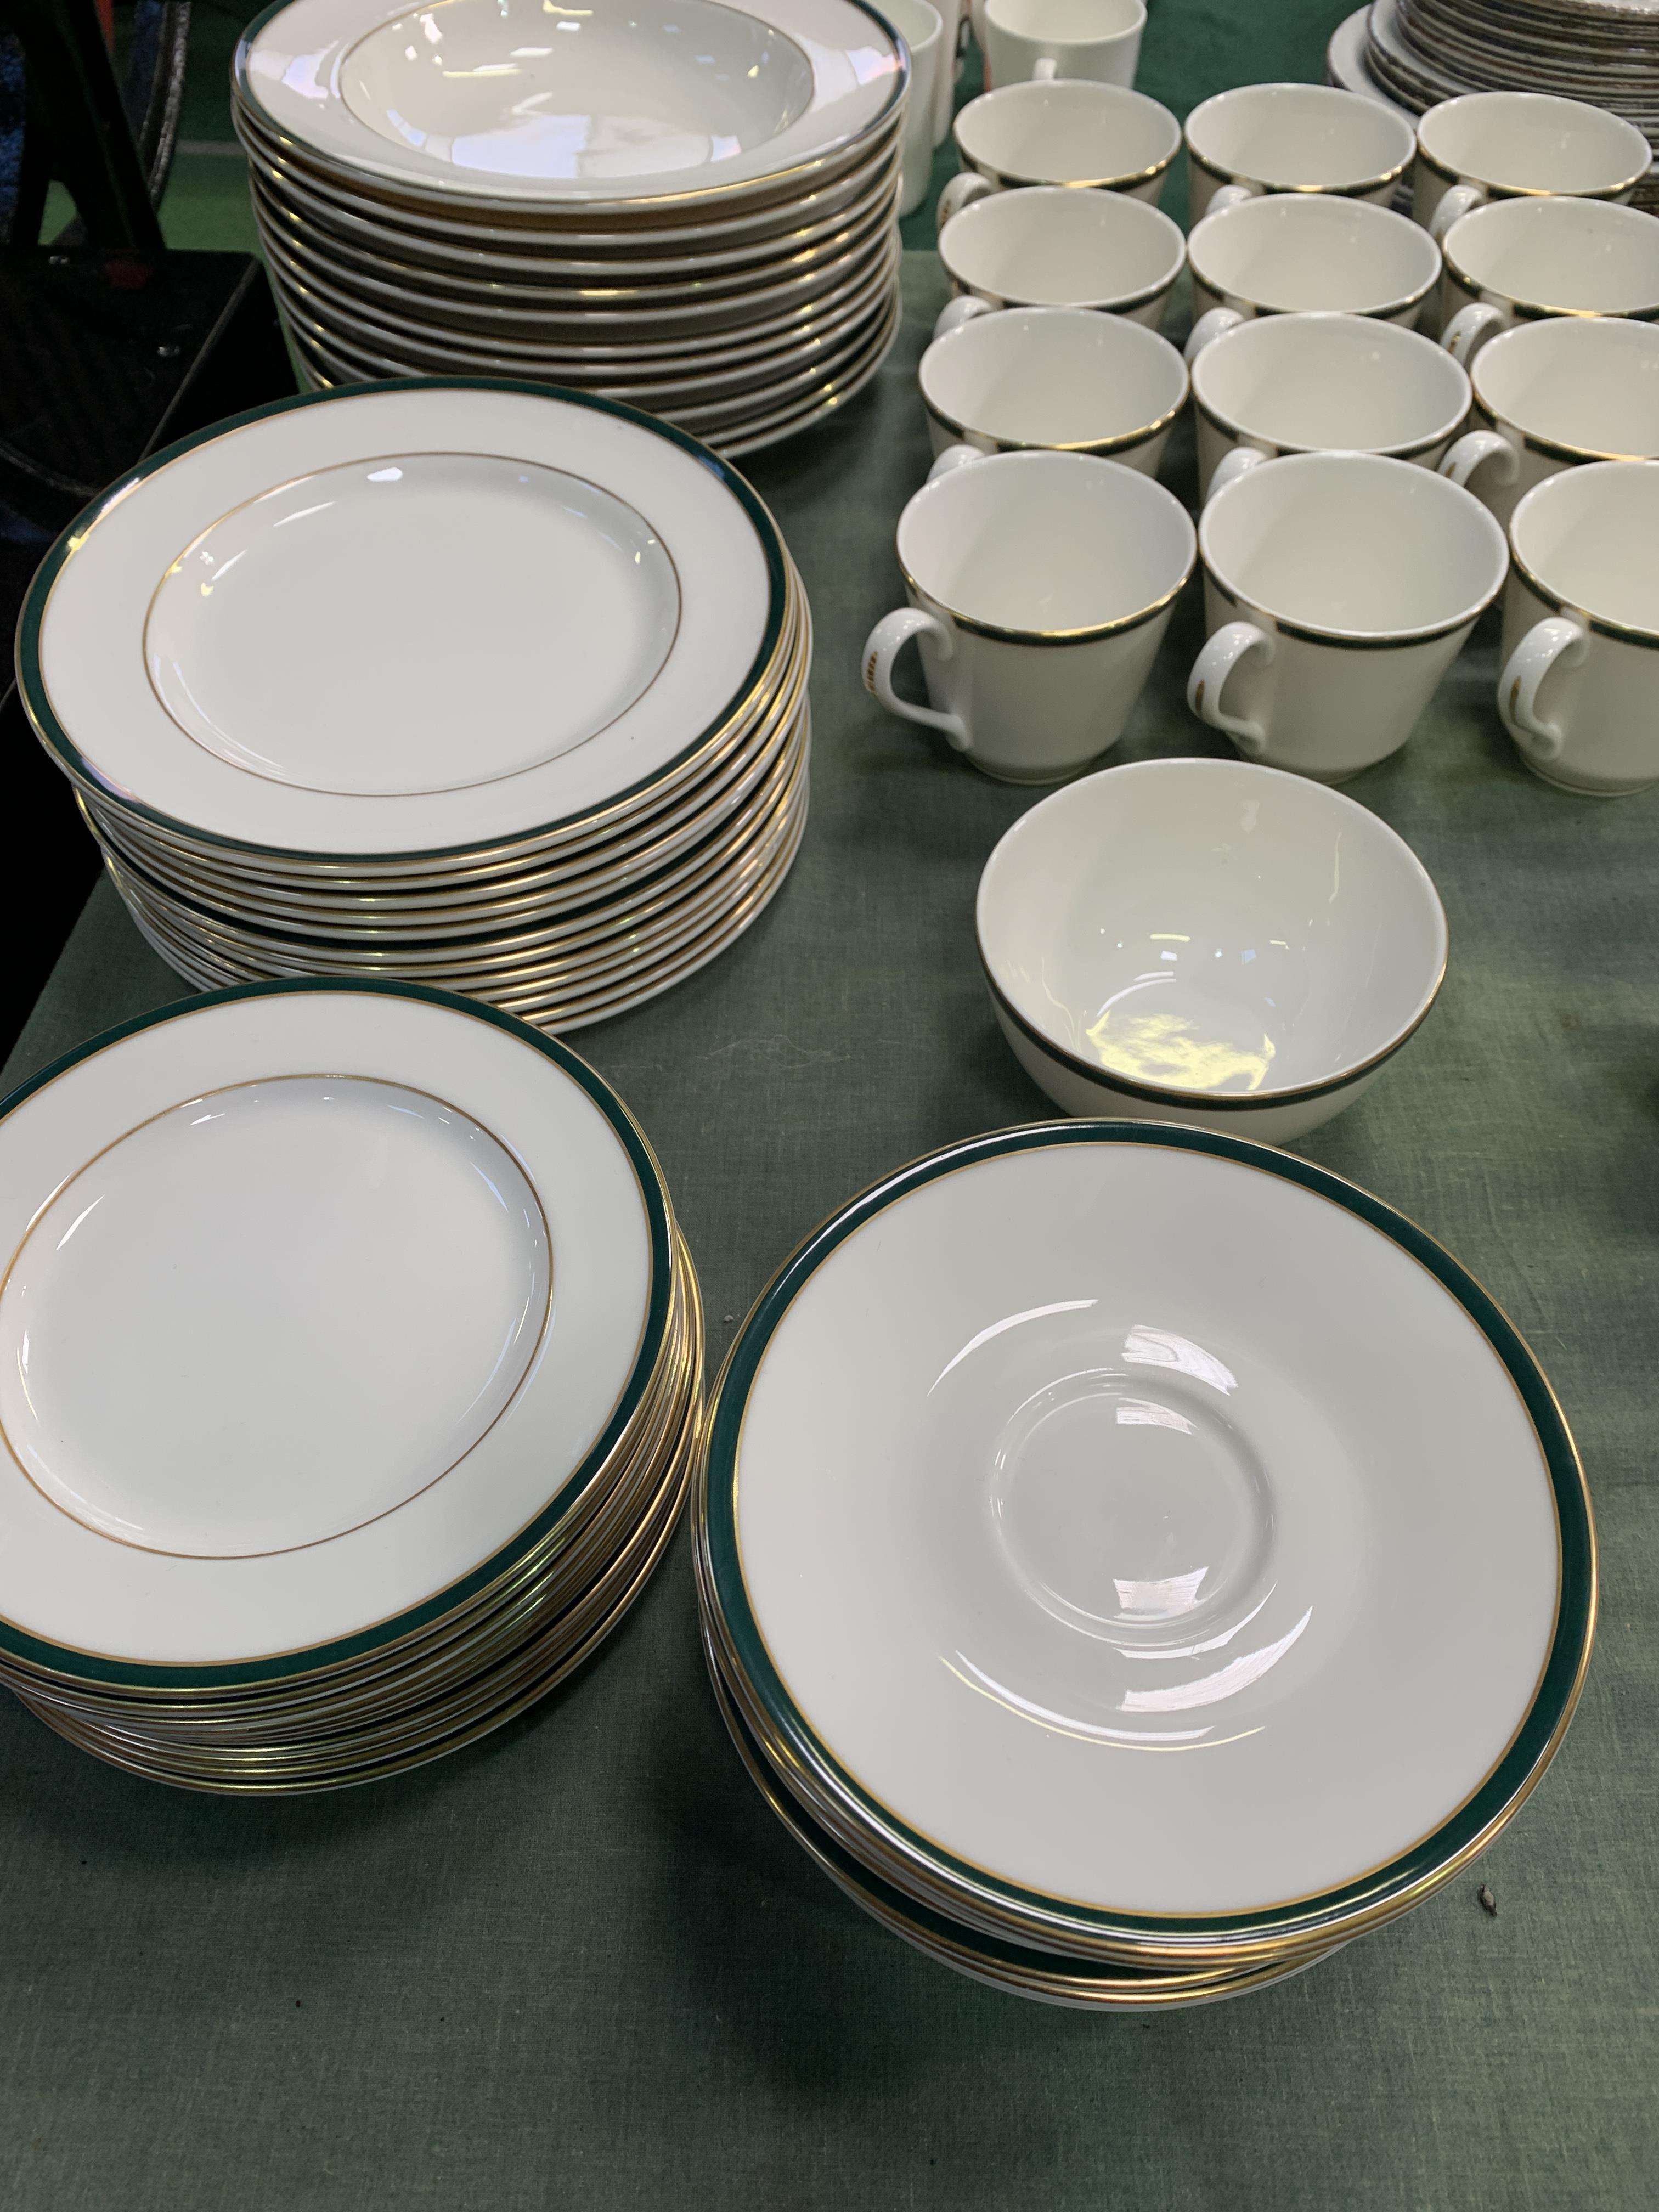 Royal Doulton 'Oxford Green' ten place setting dinner service - Image 5 of 6